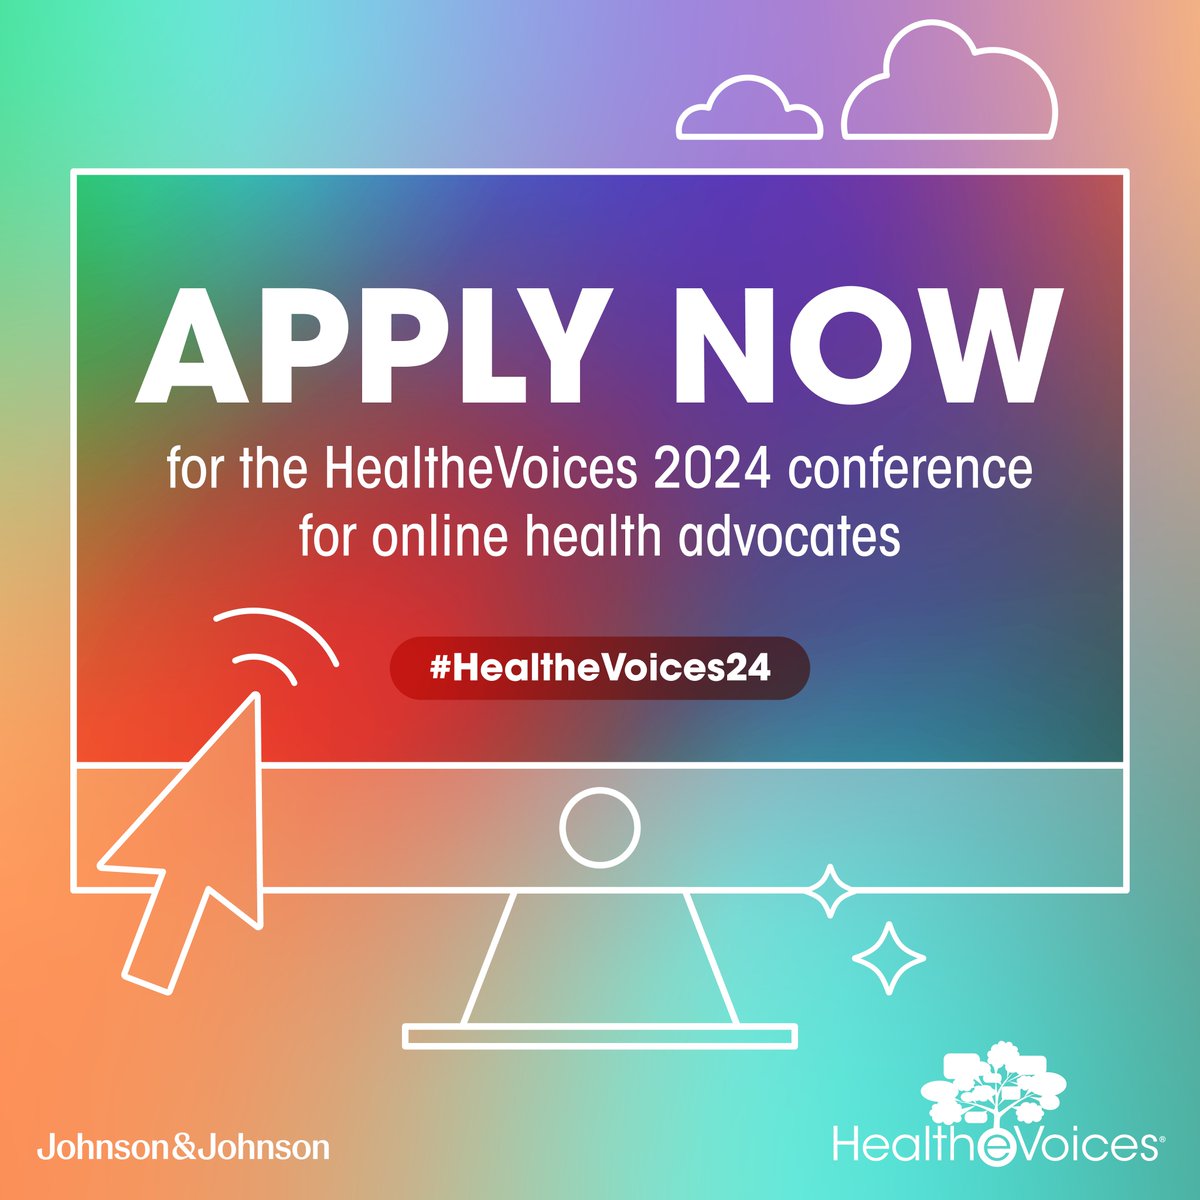 Calling health advocates: Applications are now open for the one-of-a-kind @healthevoices annual conference. Apply by March 25 for the opportunity to gather with fellow advocates for a weekend of learning and connection: bit.ly/3PrNWqO #HealtheVoices24